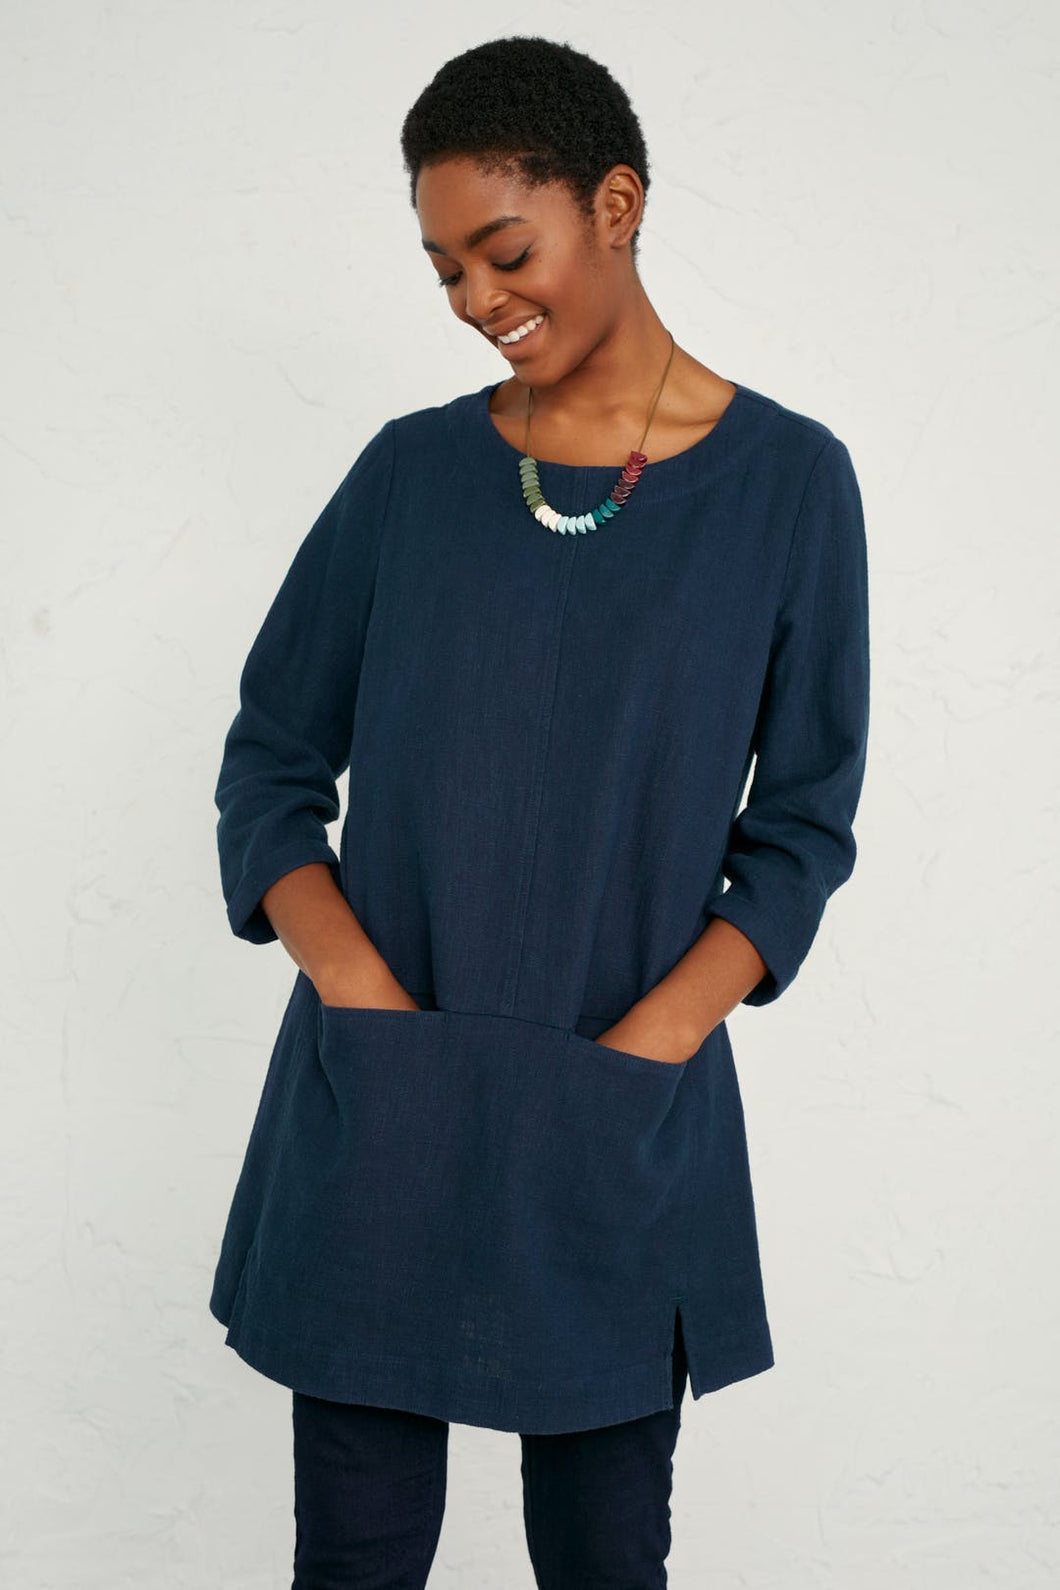 Seasalt St Agnes clay tunic in Waterline